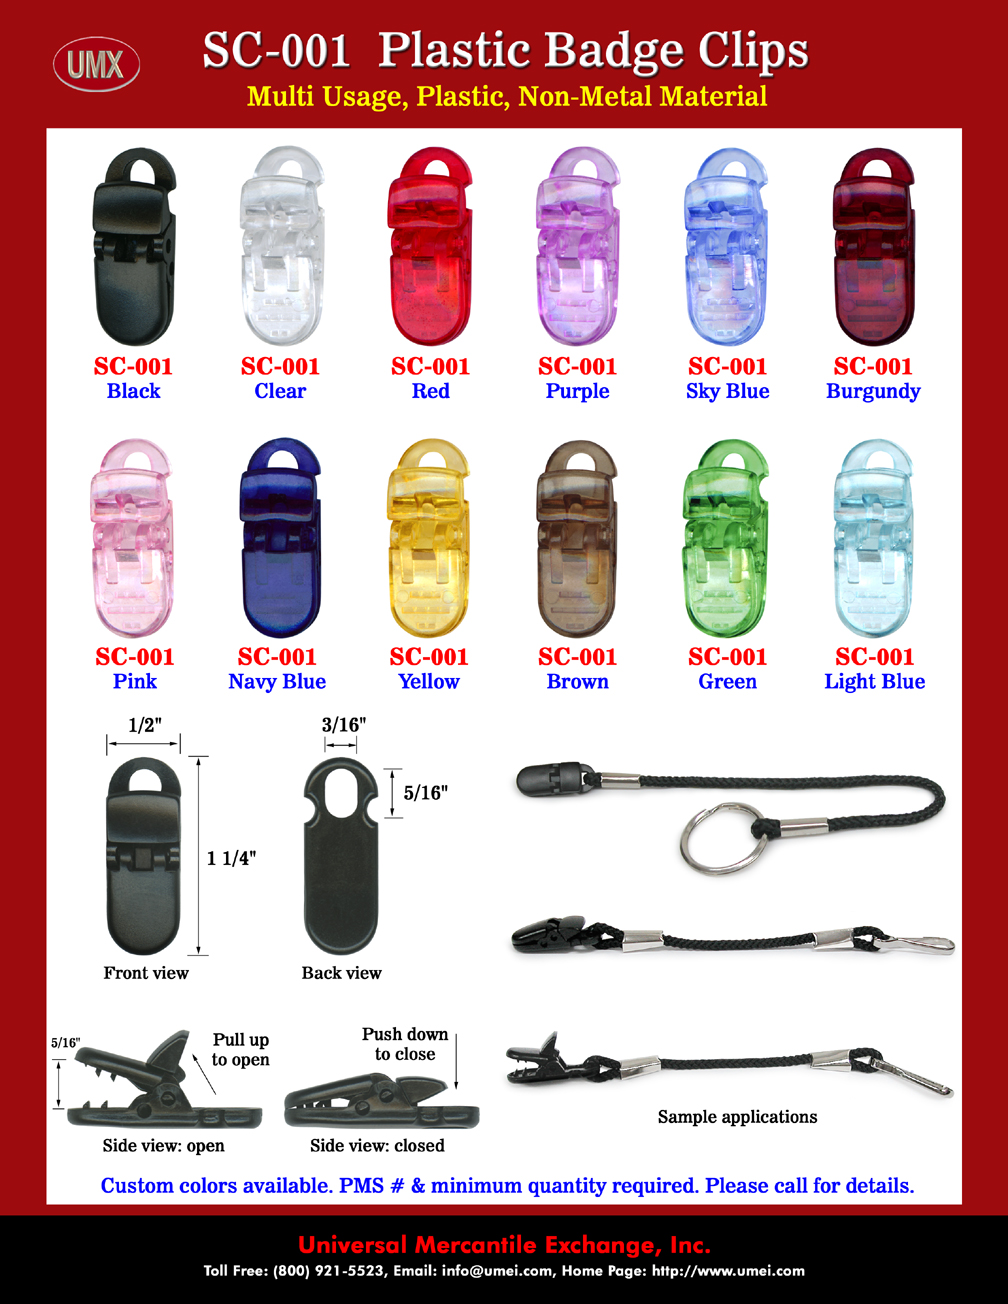 Colorful Plastic Badge Clips For Plastic Name Badges or IDs